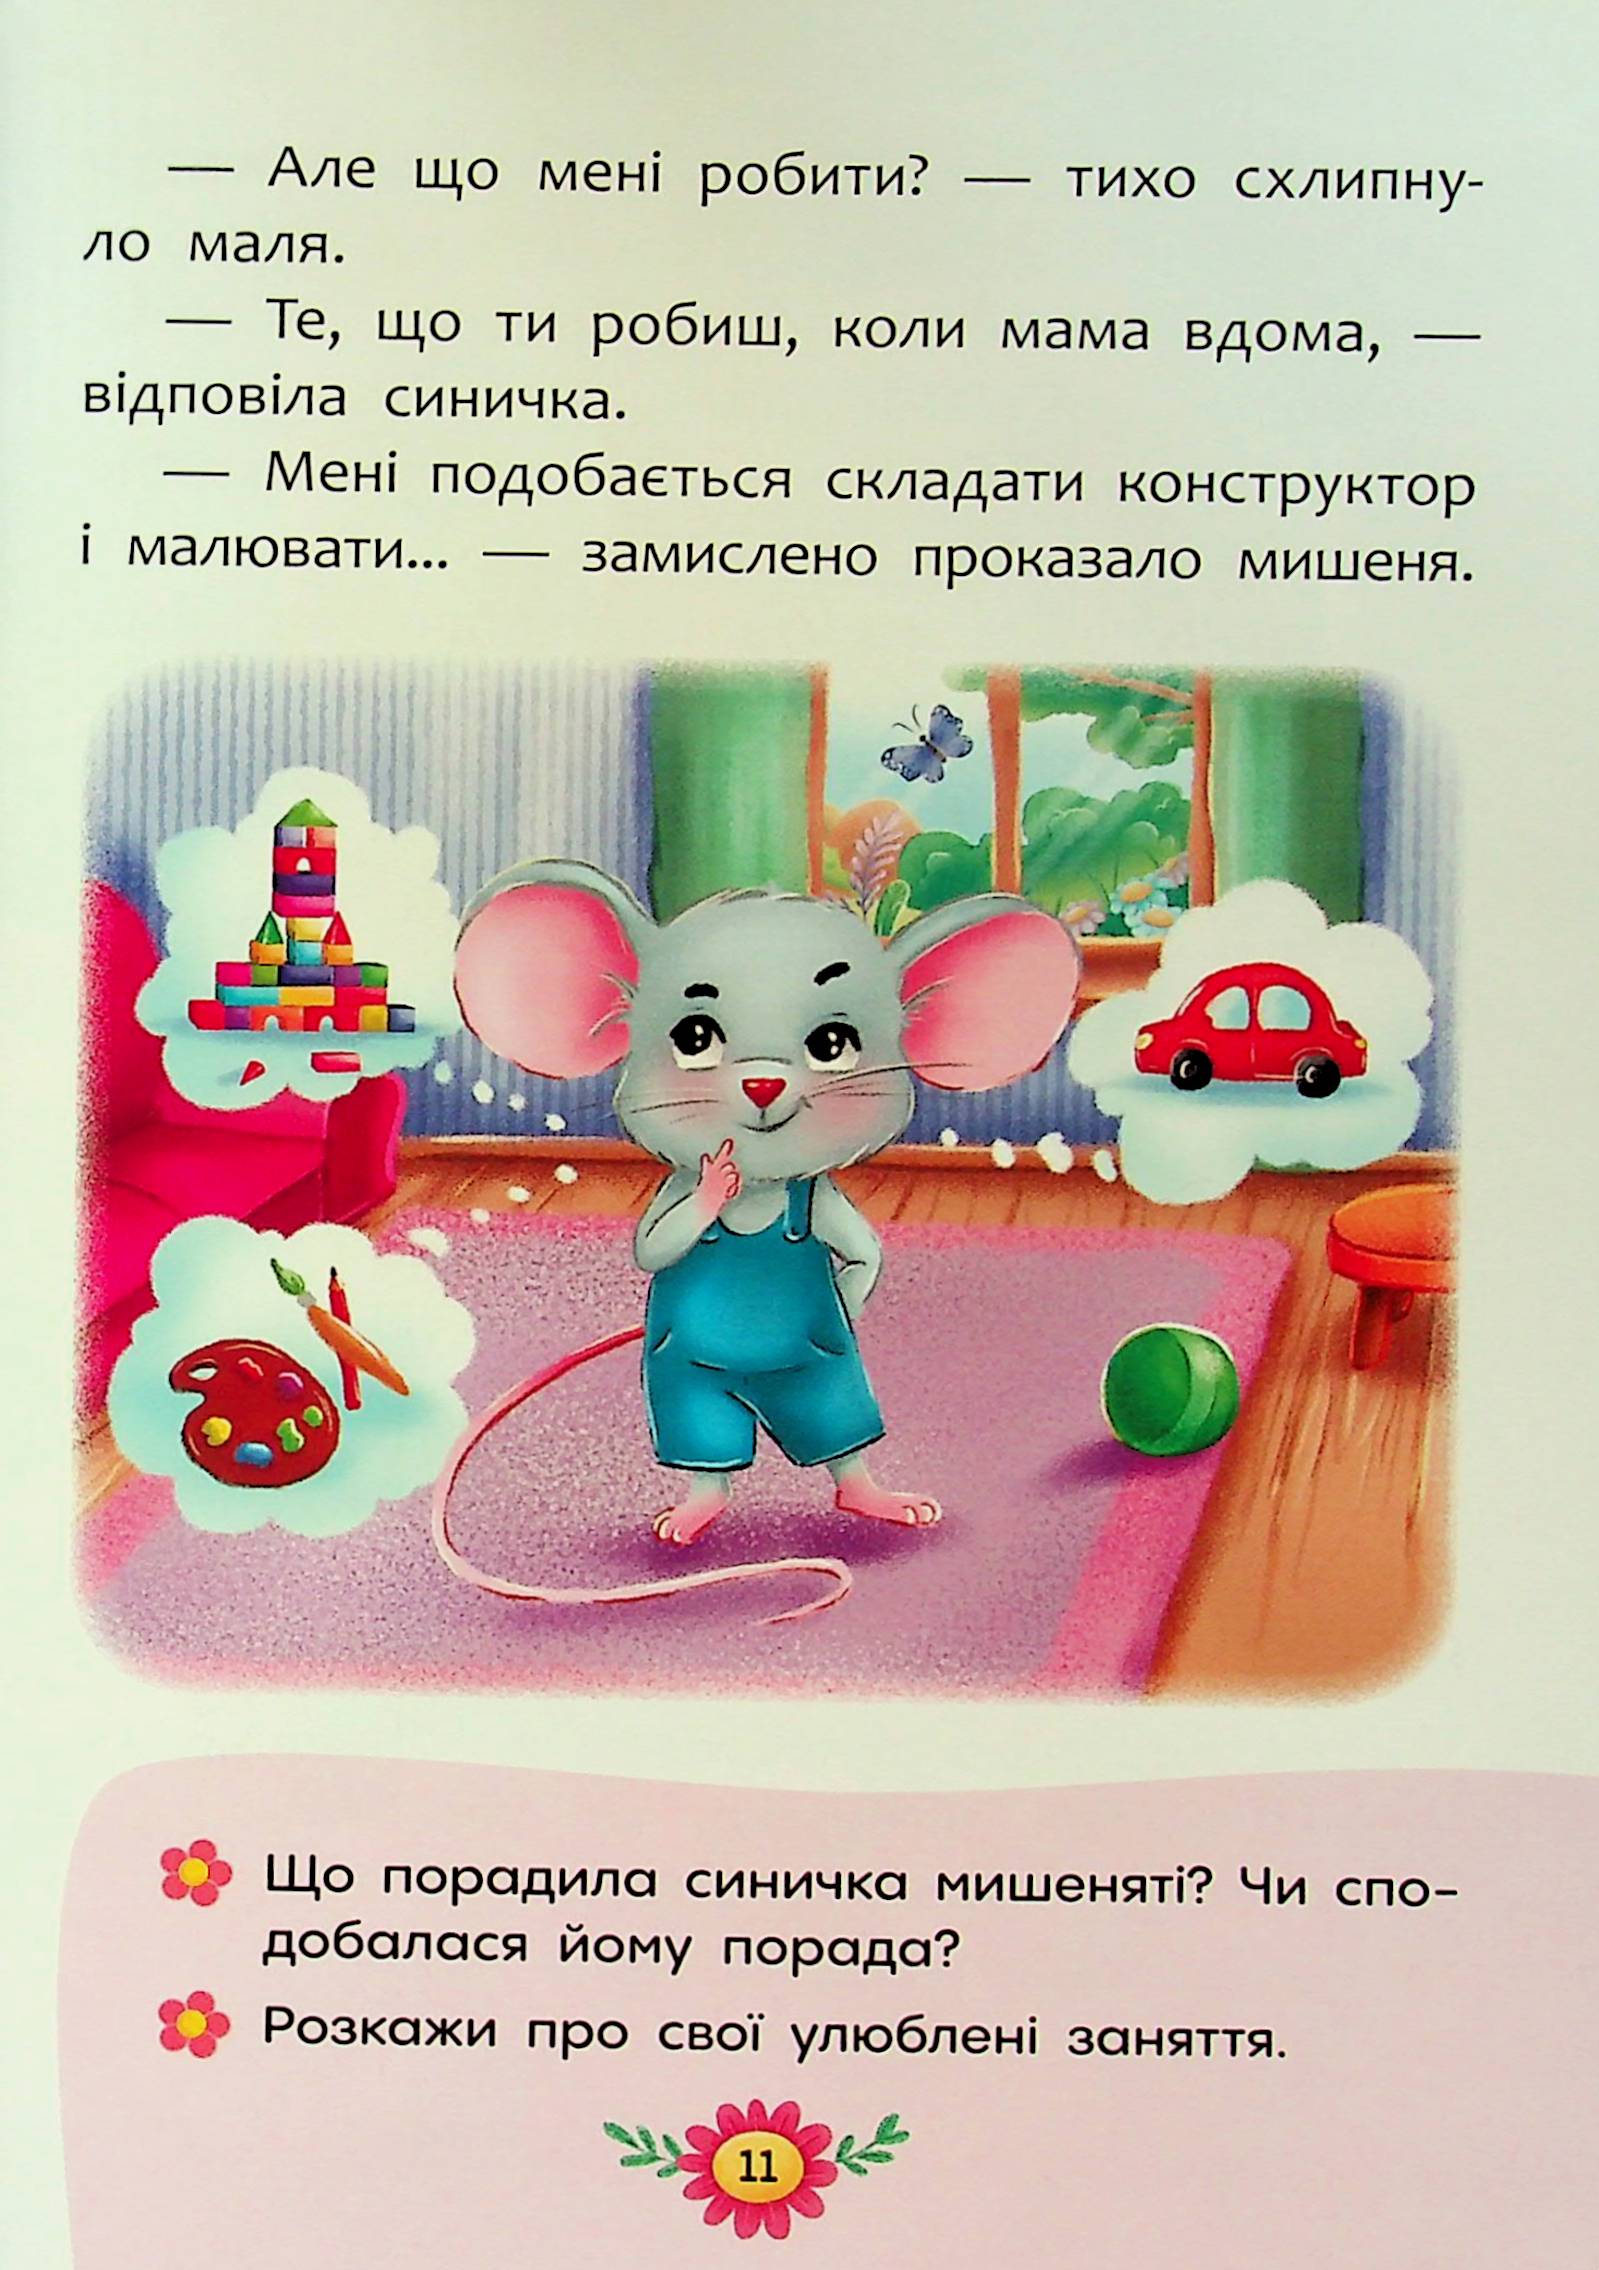 Educational fairy tales. Everything that is important for children to know / Виховальні казки. Усе, що важливо знати дітям  978-617-547-490-7-10